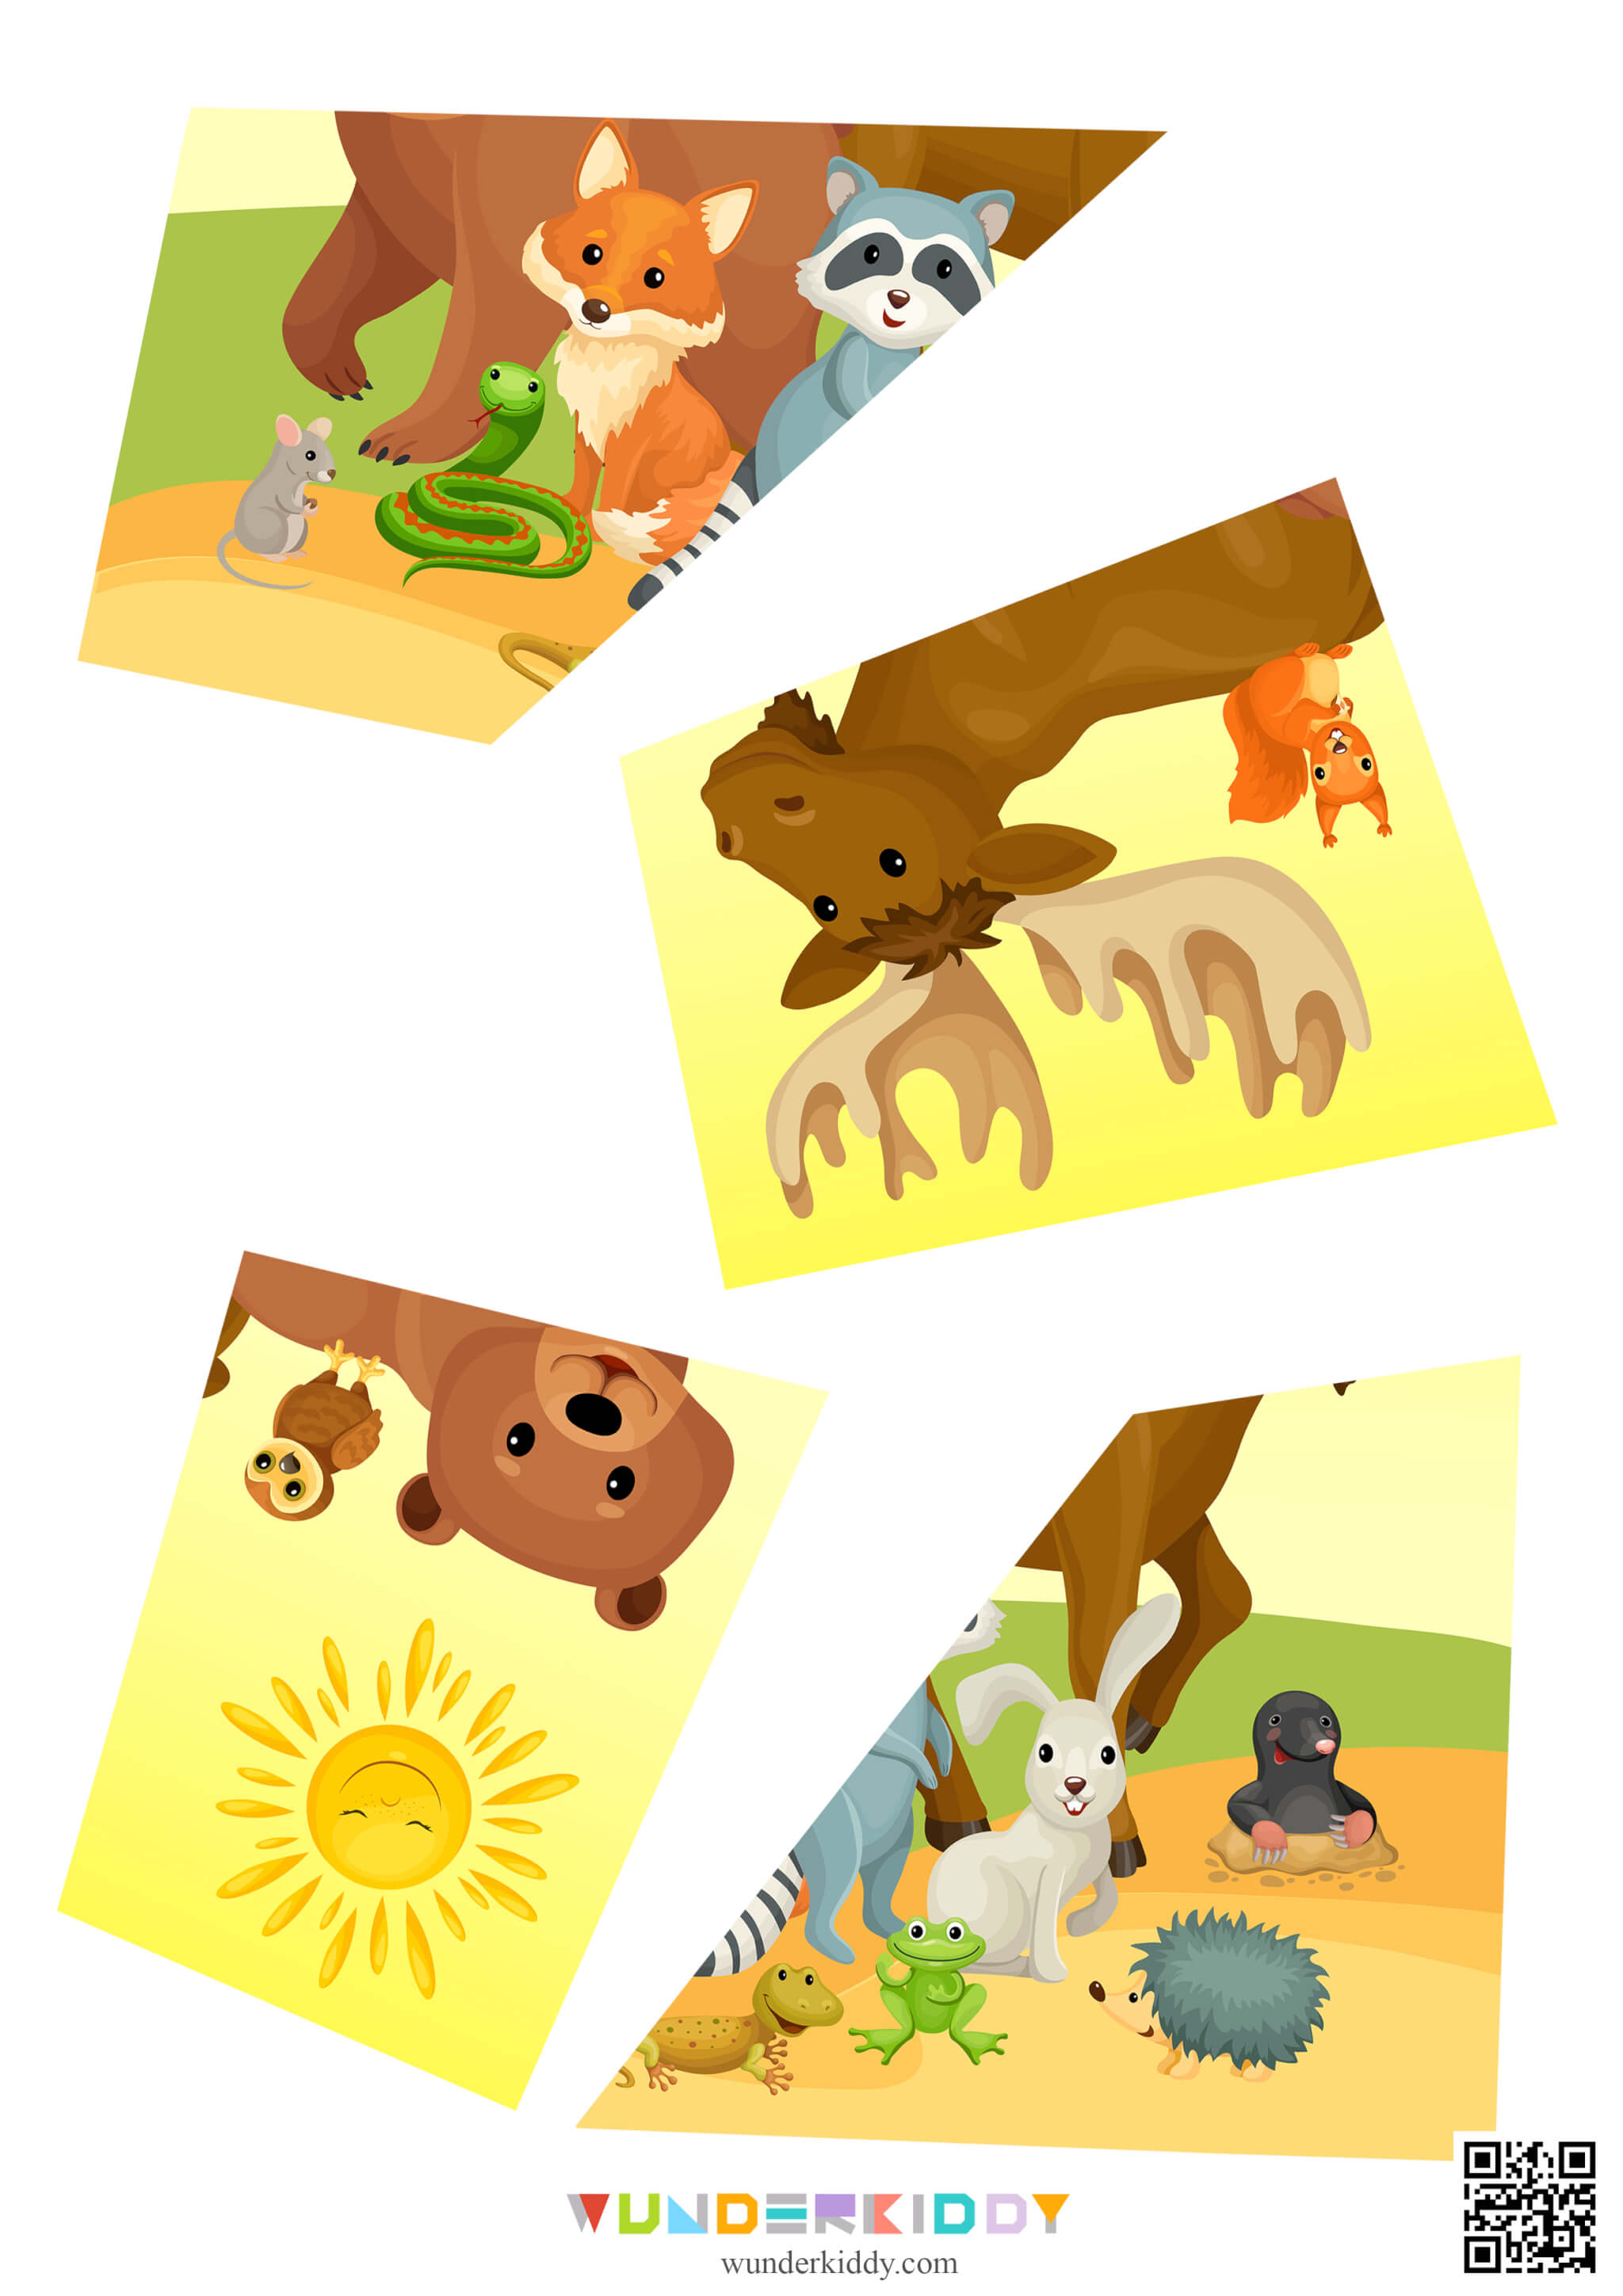 Simple Jigsaw Puzzles of Animals - Image 8